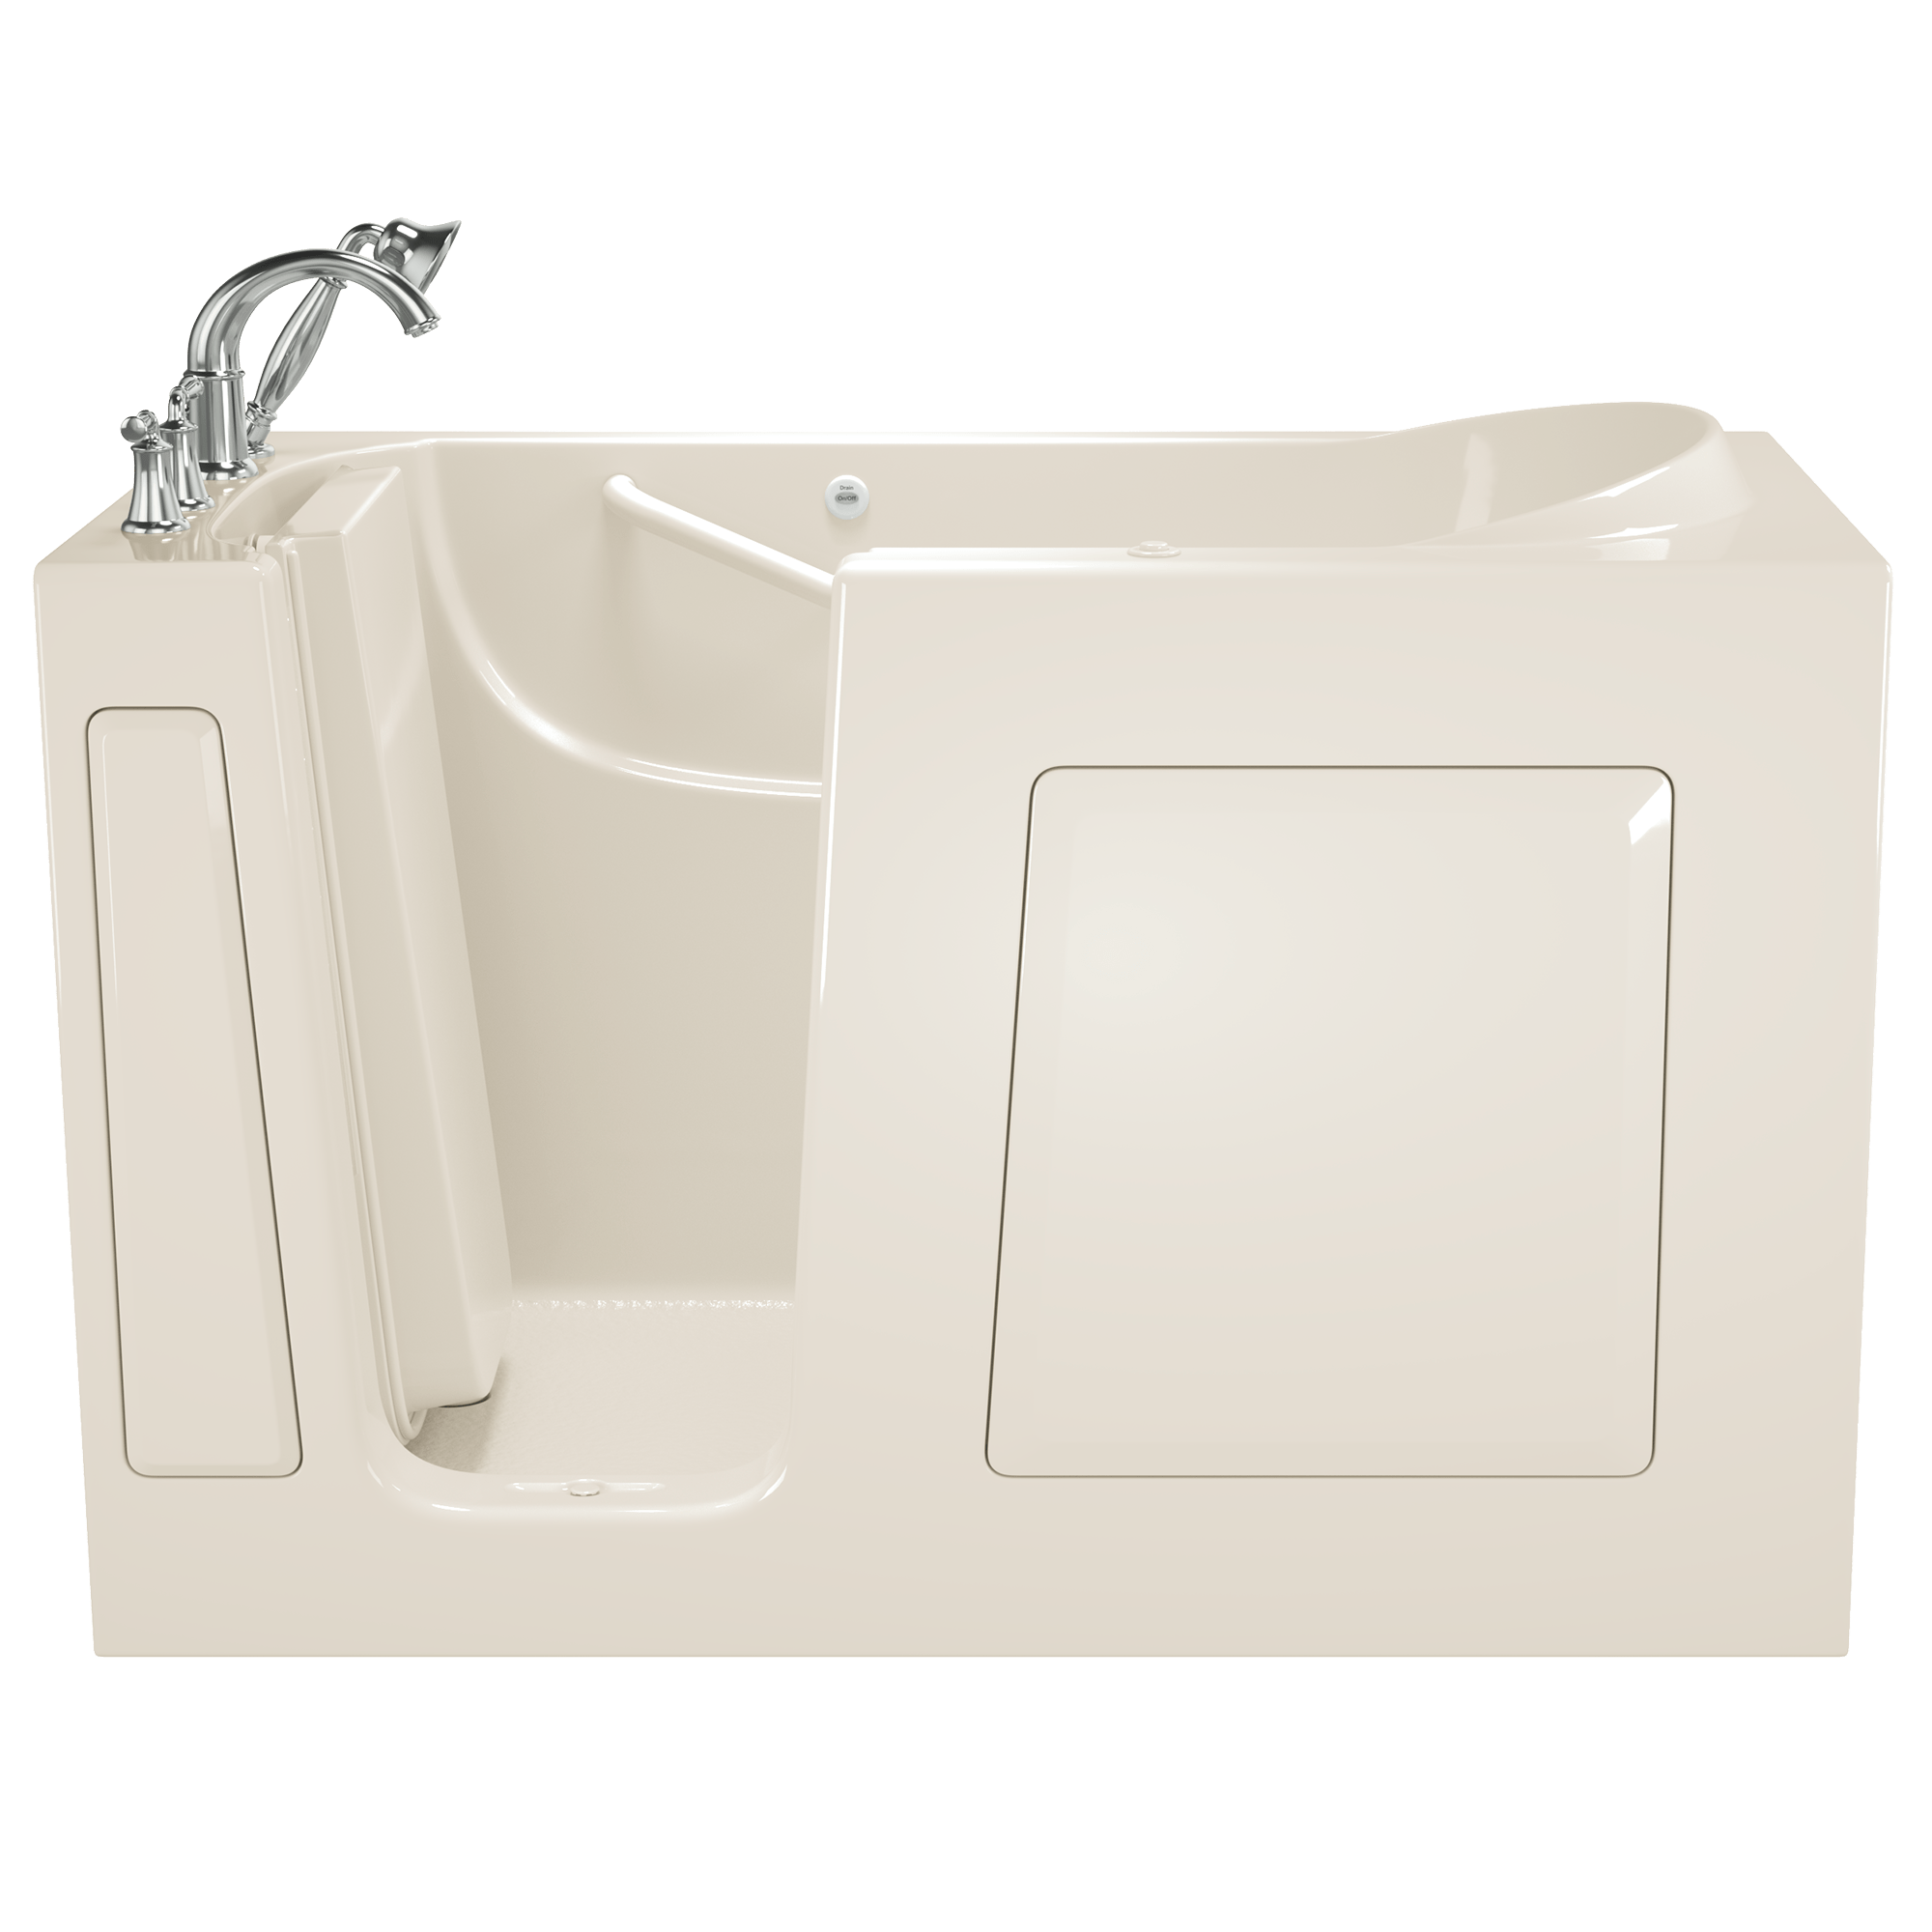 Gelcoat Value Series 30 x 60 -Inch Walk-in Tub With Whirlpool System - Left-Hand Drain With Faucet